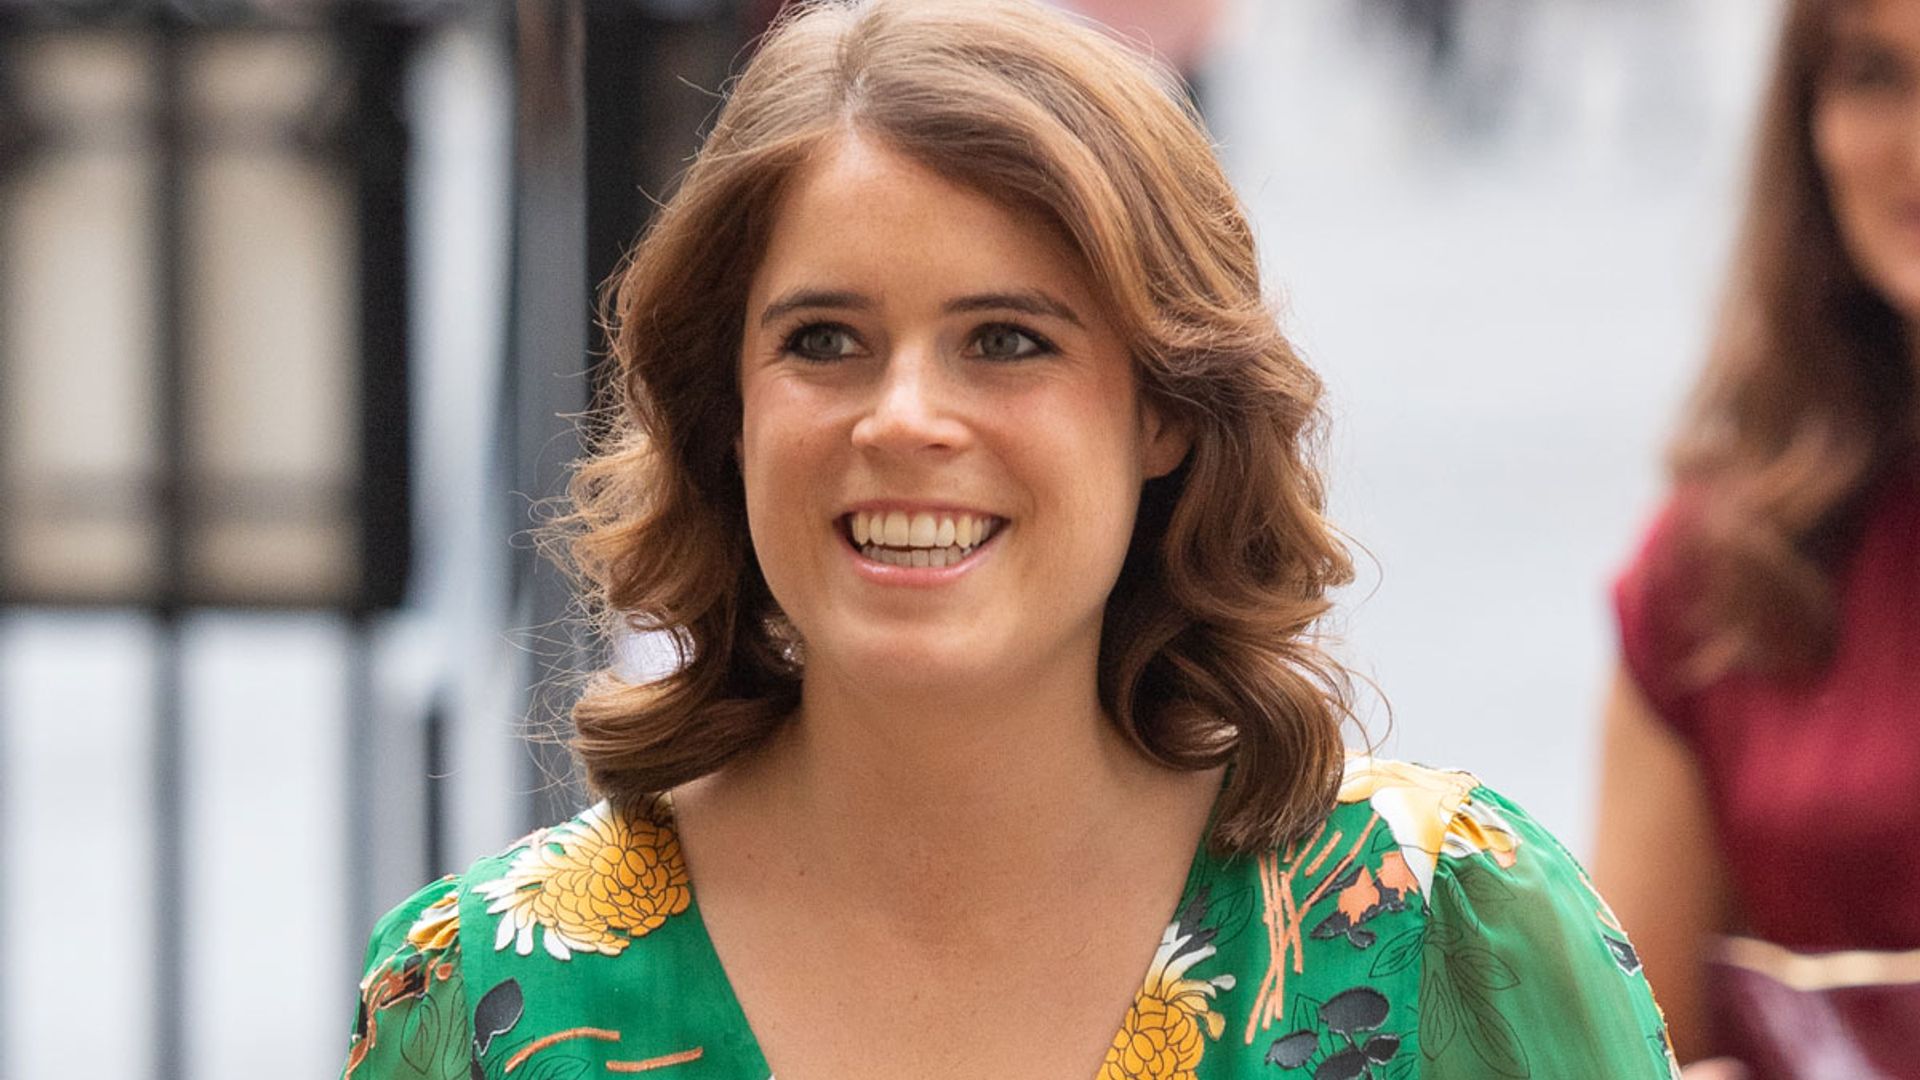 Princess Eugenie looks bold and beautiful in knee-high boots - and we almost missed it